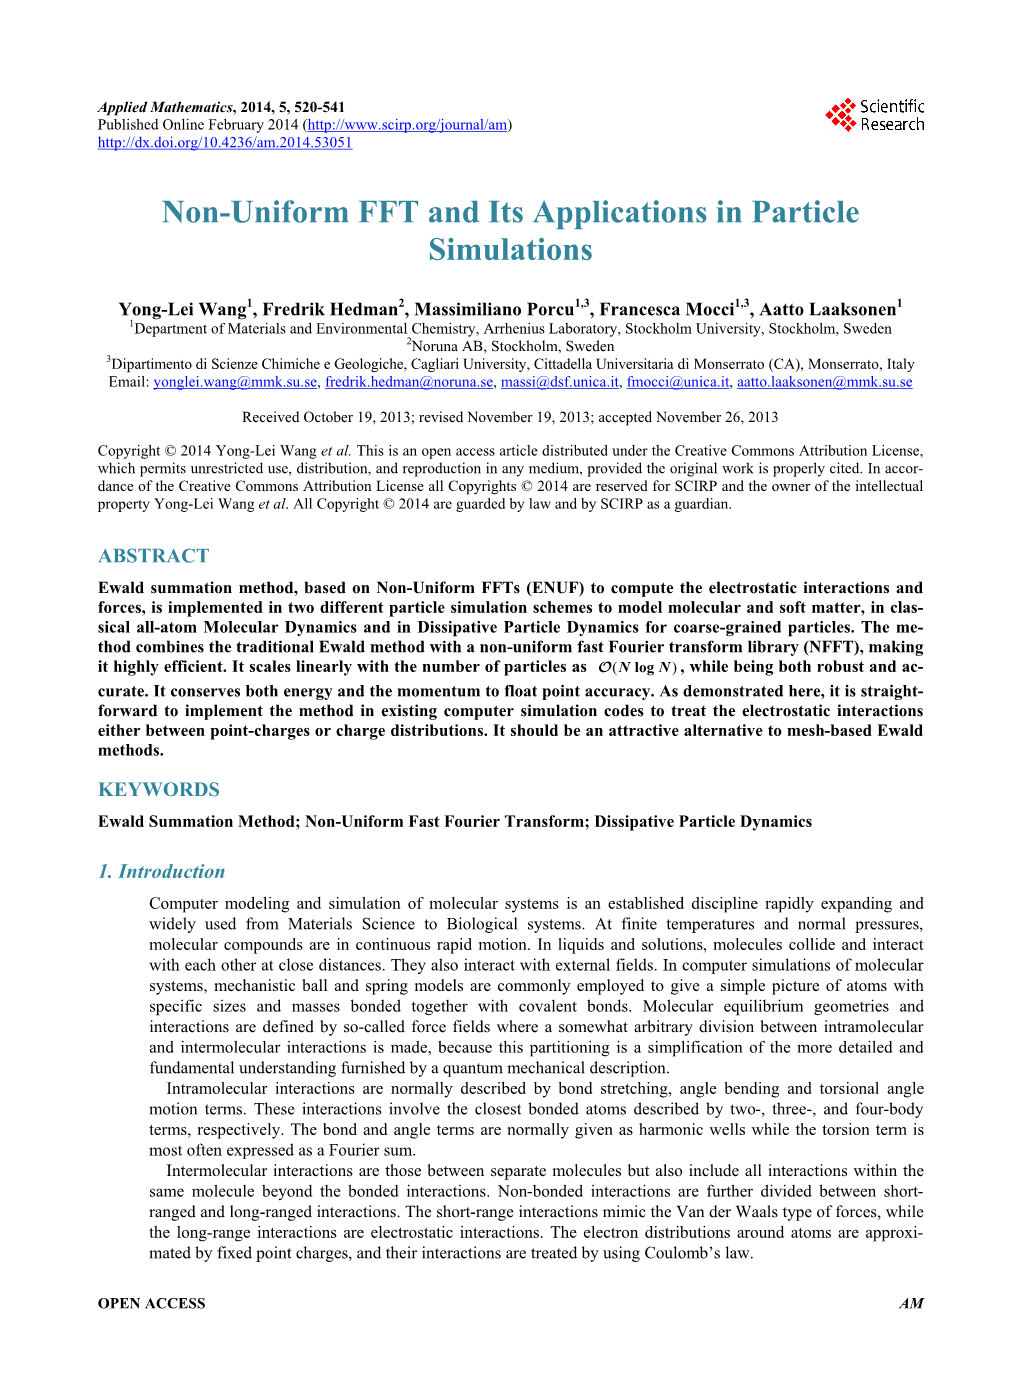 Non-Uniform FFT and Its Applications in Particle Simulations